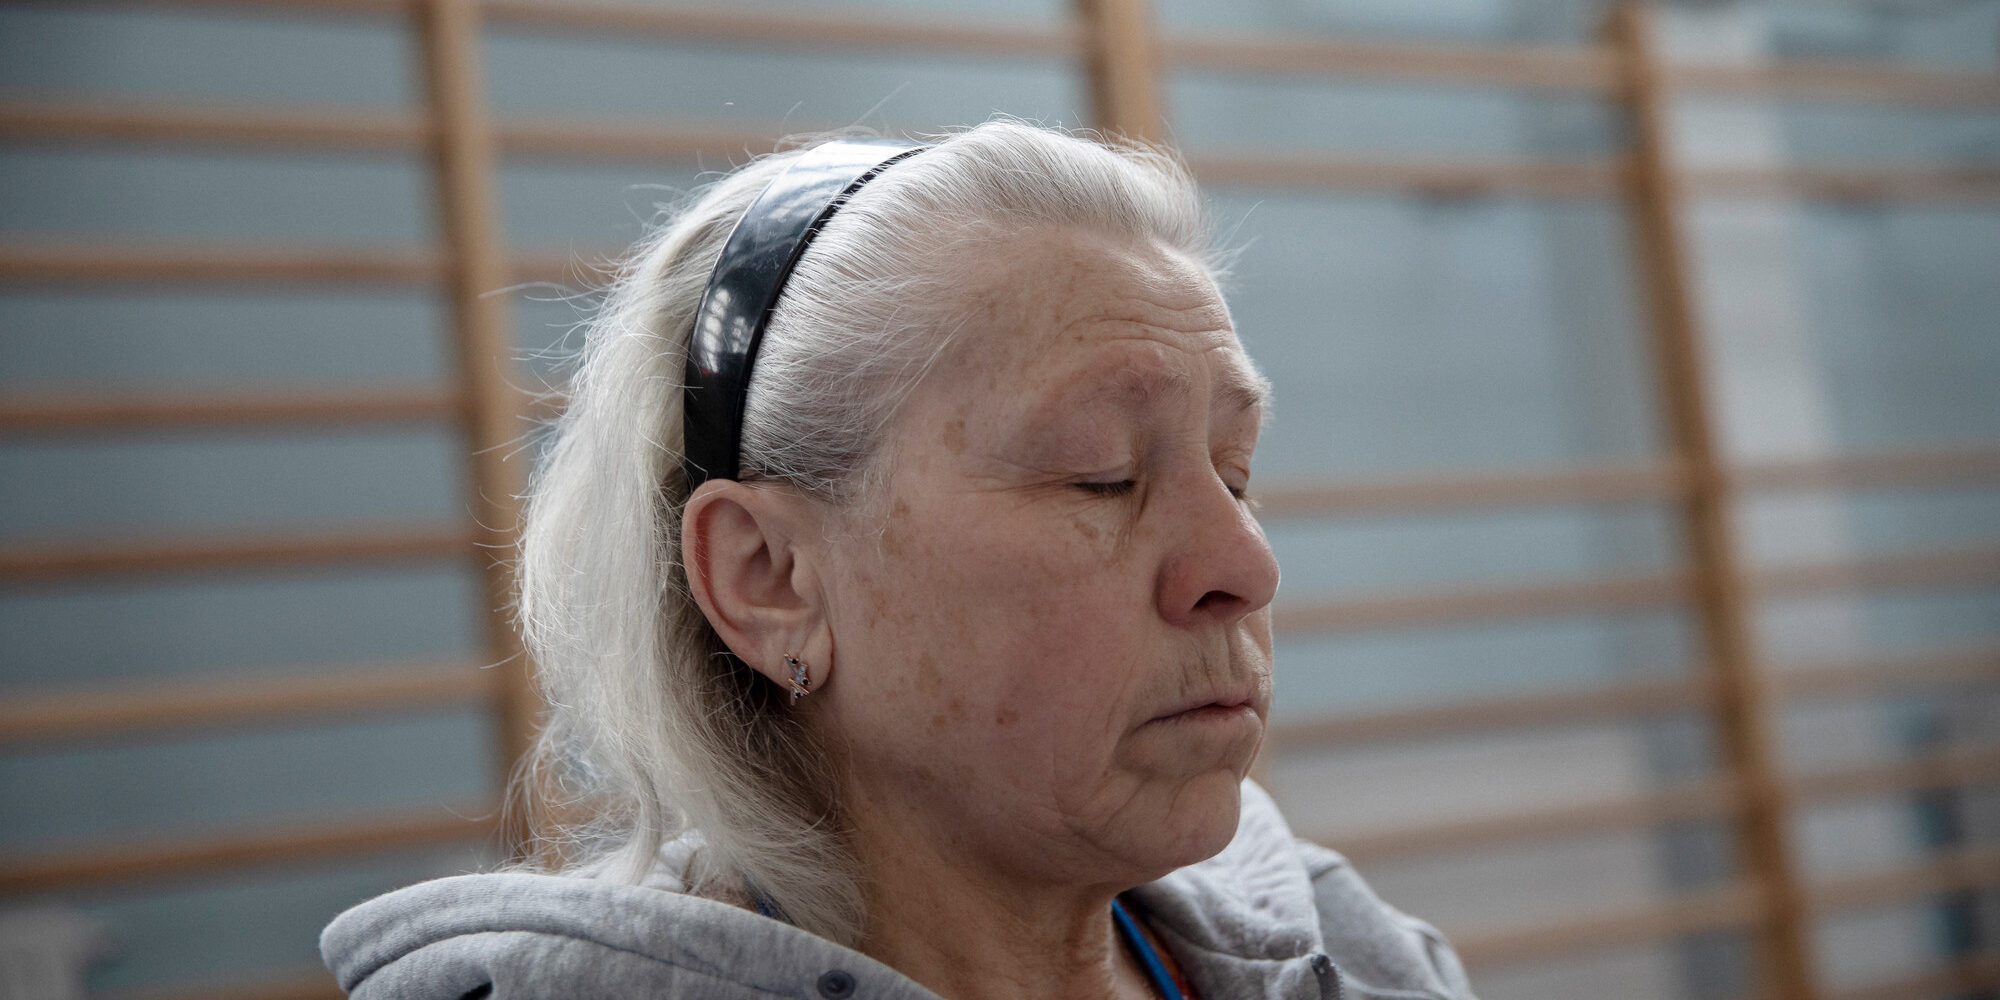 Tatiana Ganchou was displaced a first time during the Tchernobyl catastrophe, when she was a young girl living in Pripyat. "I can't sleep, I have panic inside. I am frightened that everything will happen again like in Tchernobyl, I have the same feeling I had then," she said. Adrienne Surprenant /MYOP